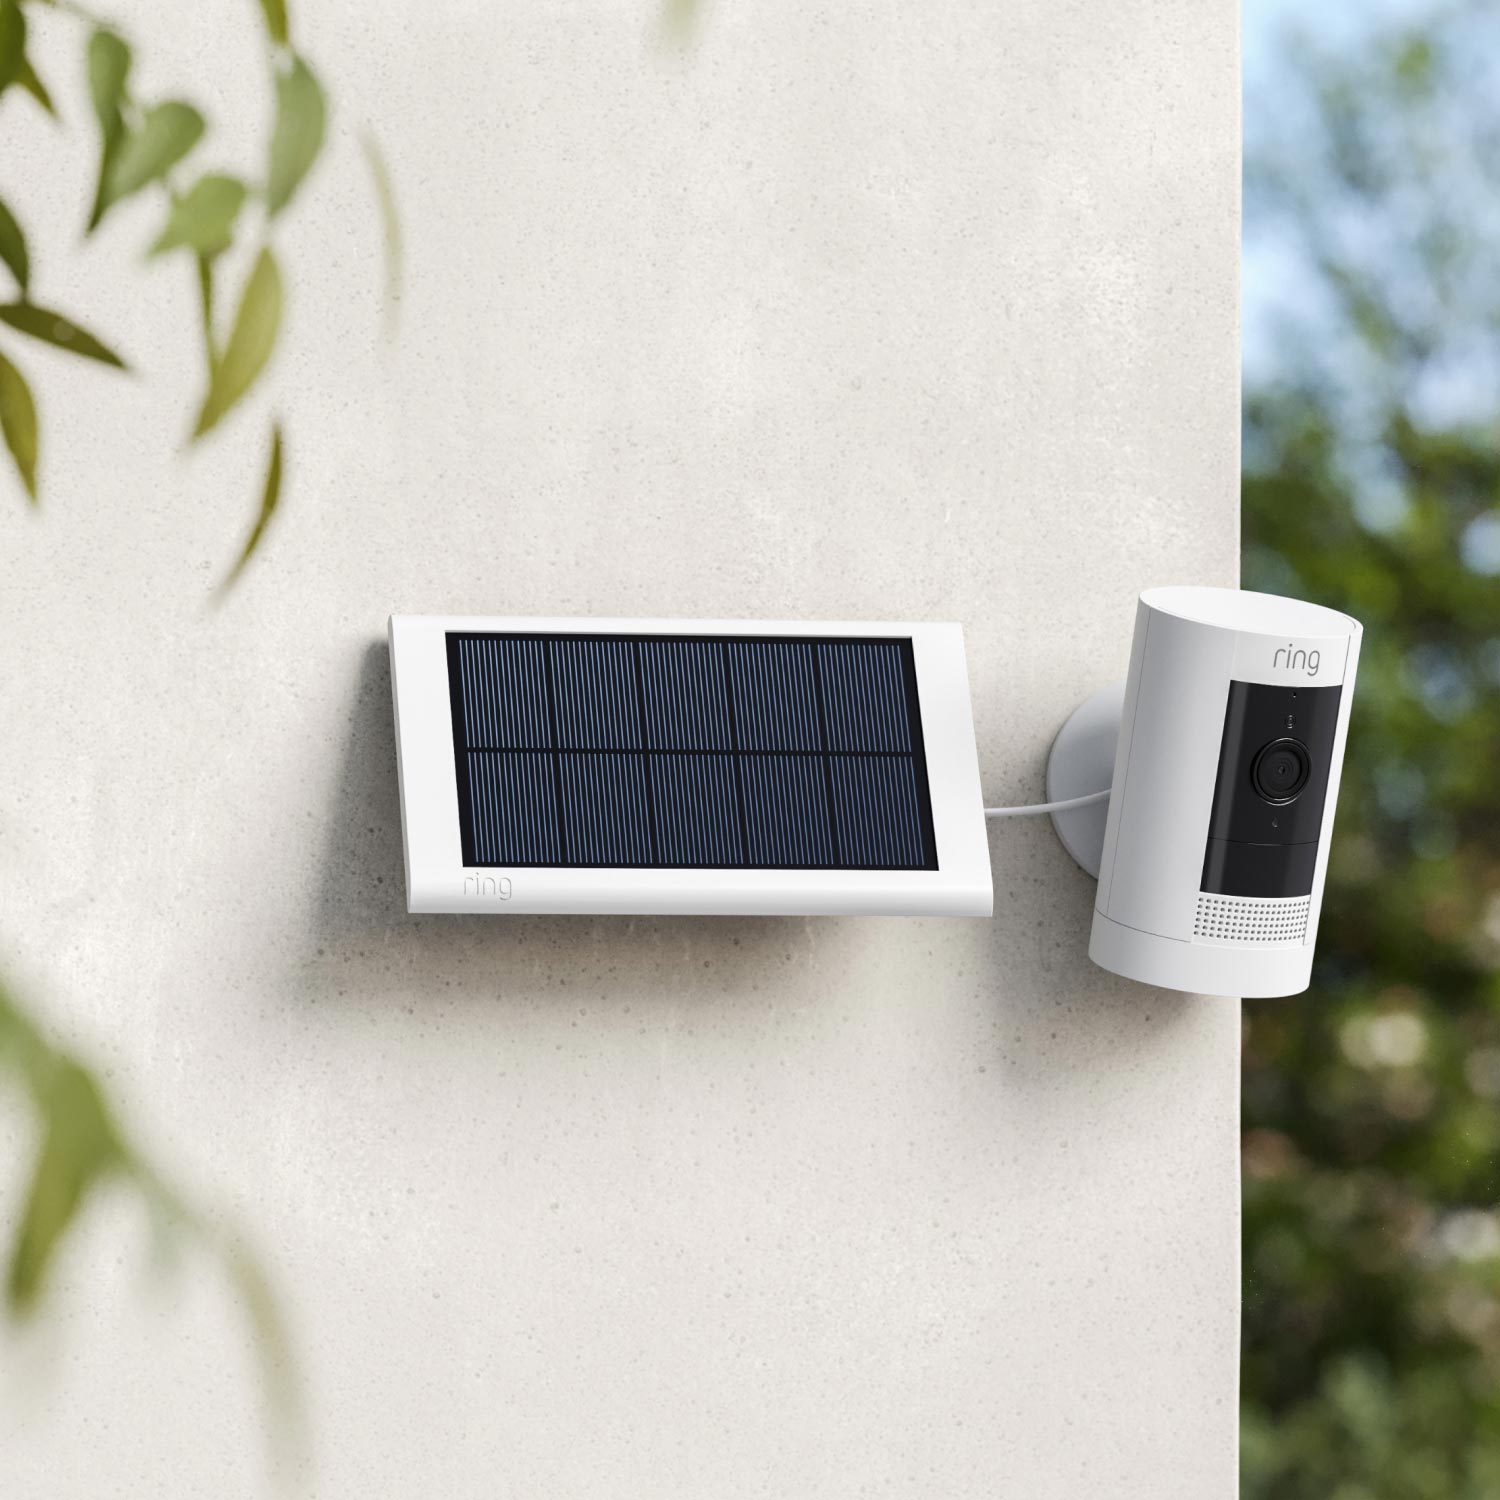 Stick Up Cam Solar - Stick Up Cam and small solar panel, both in white, mounted to outside corner of house.